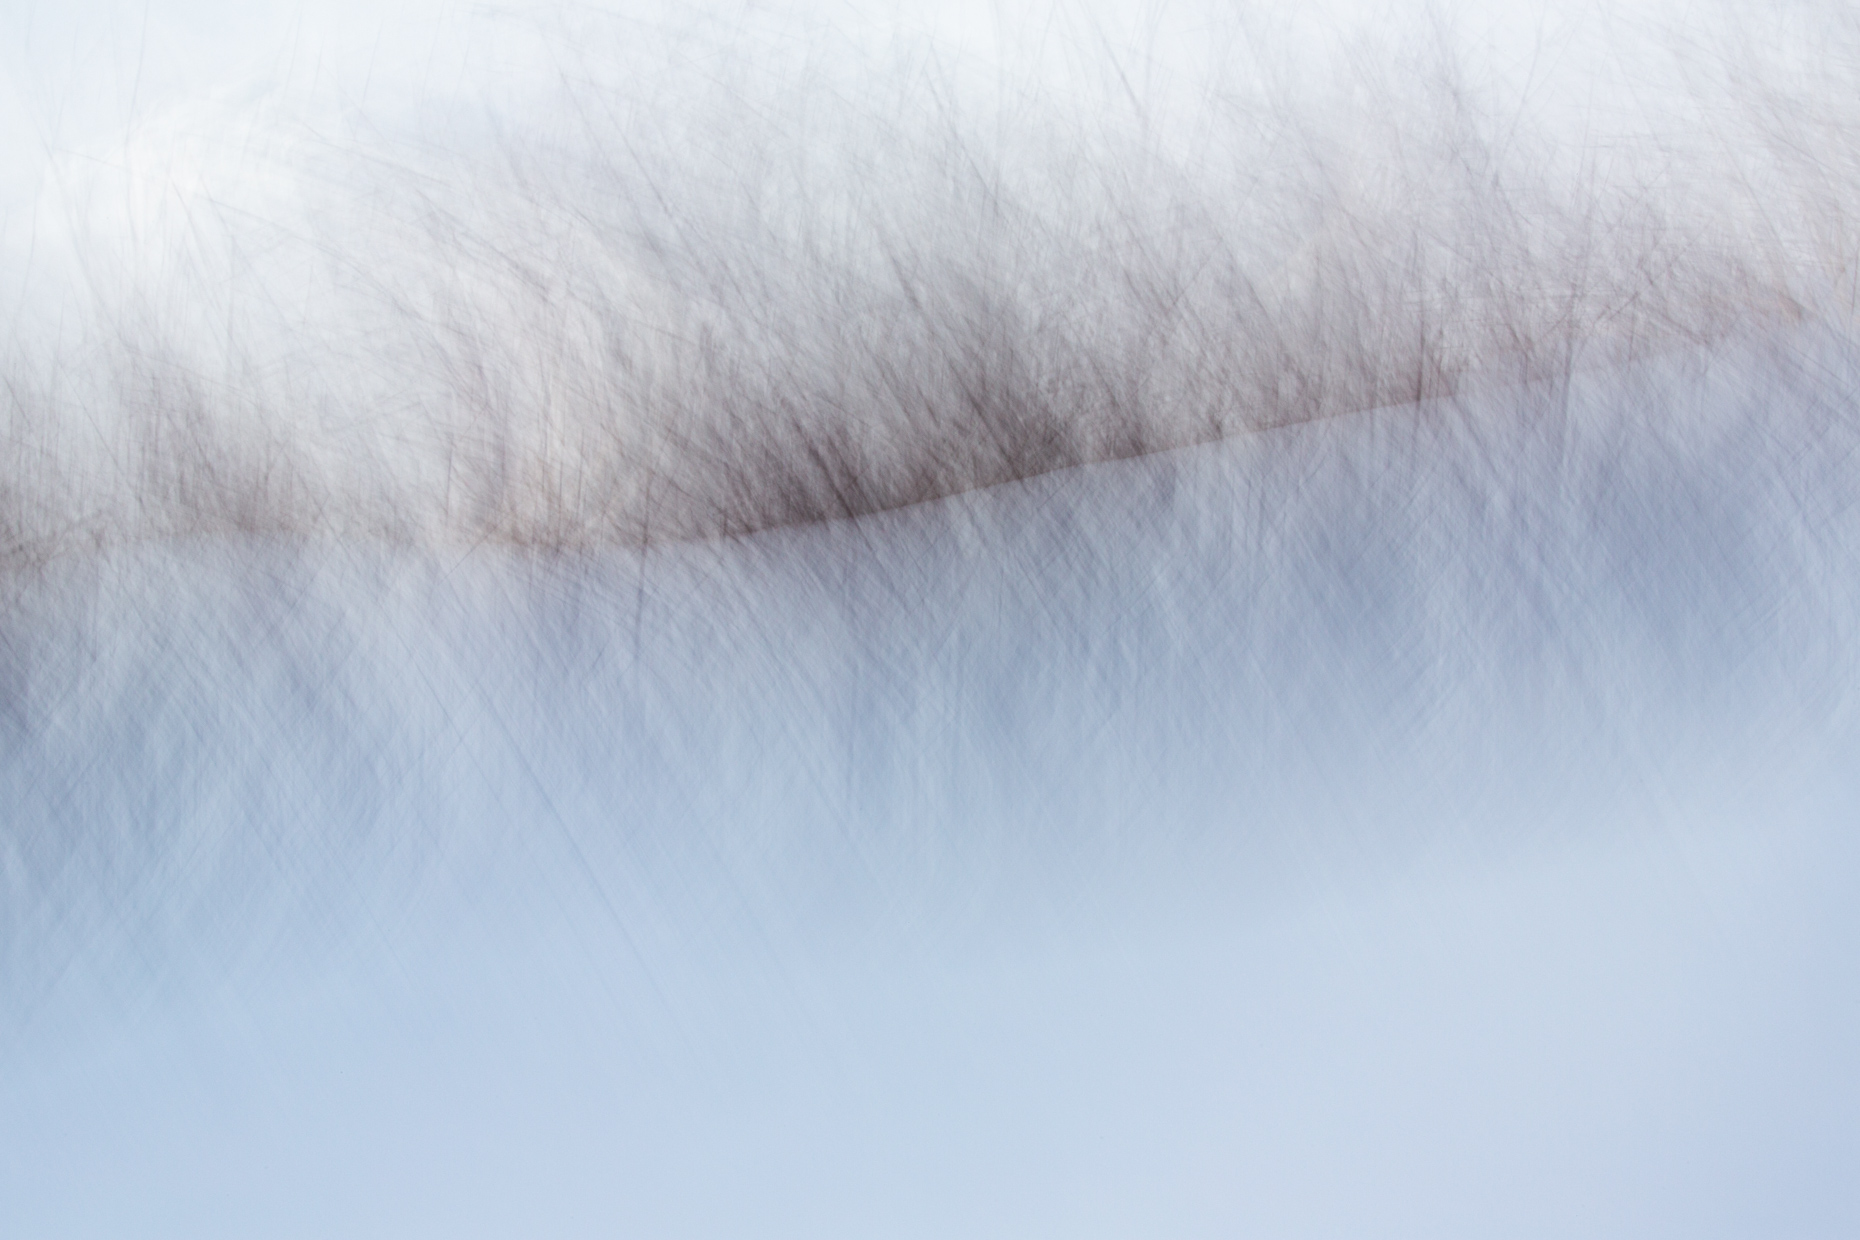 BECOMING_RIVER_ICM_GRIEF_CLIMATE_CHANGE_WINTER_ICE_SAINT_LAWRENCE_RIVER_QUEBEC_CANADA-5